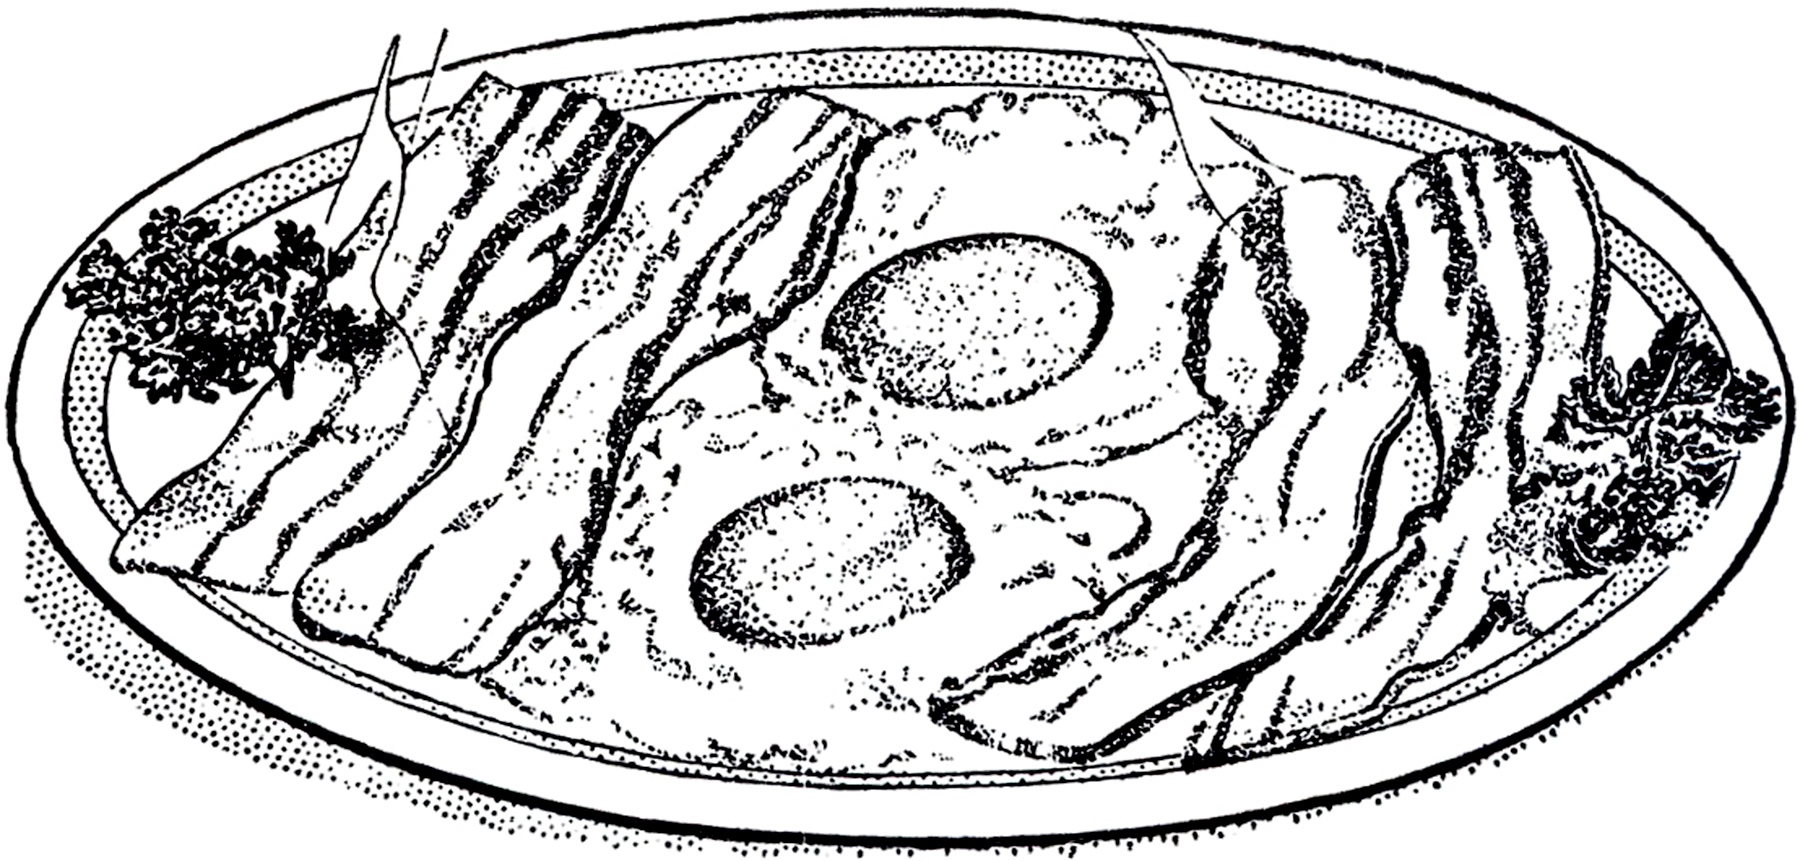 Bacon and Eggs Coloring Pages (Page 1) - Line.17QQ.com